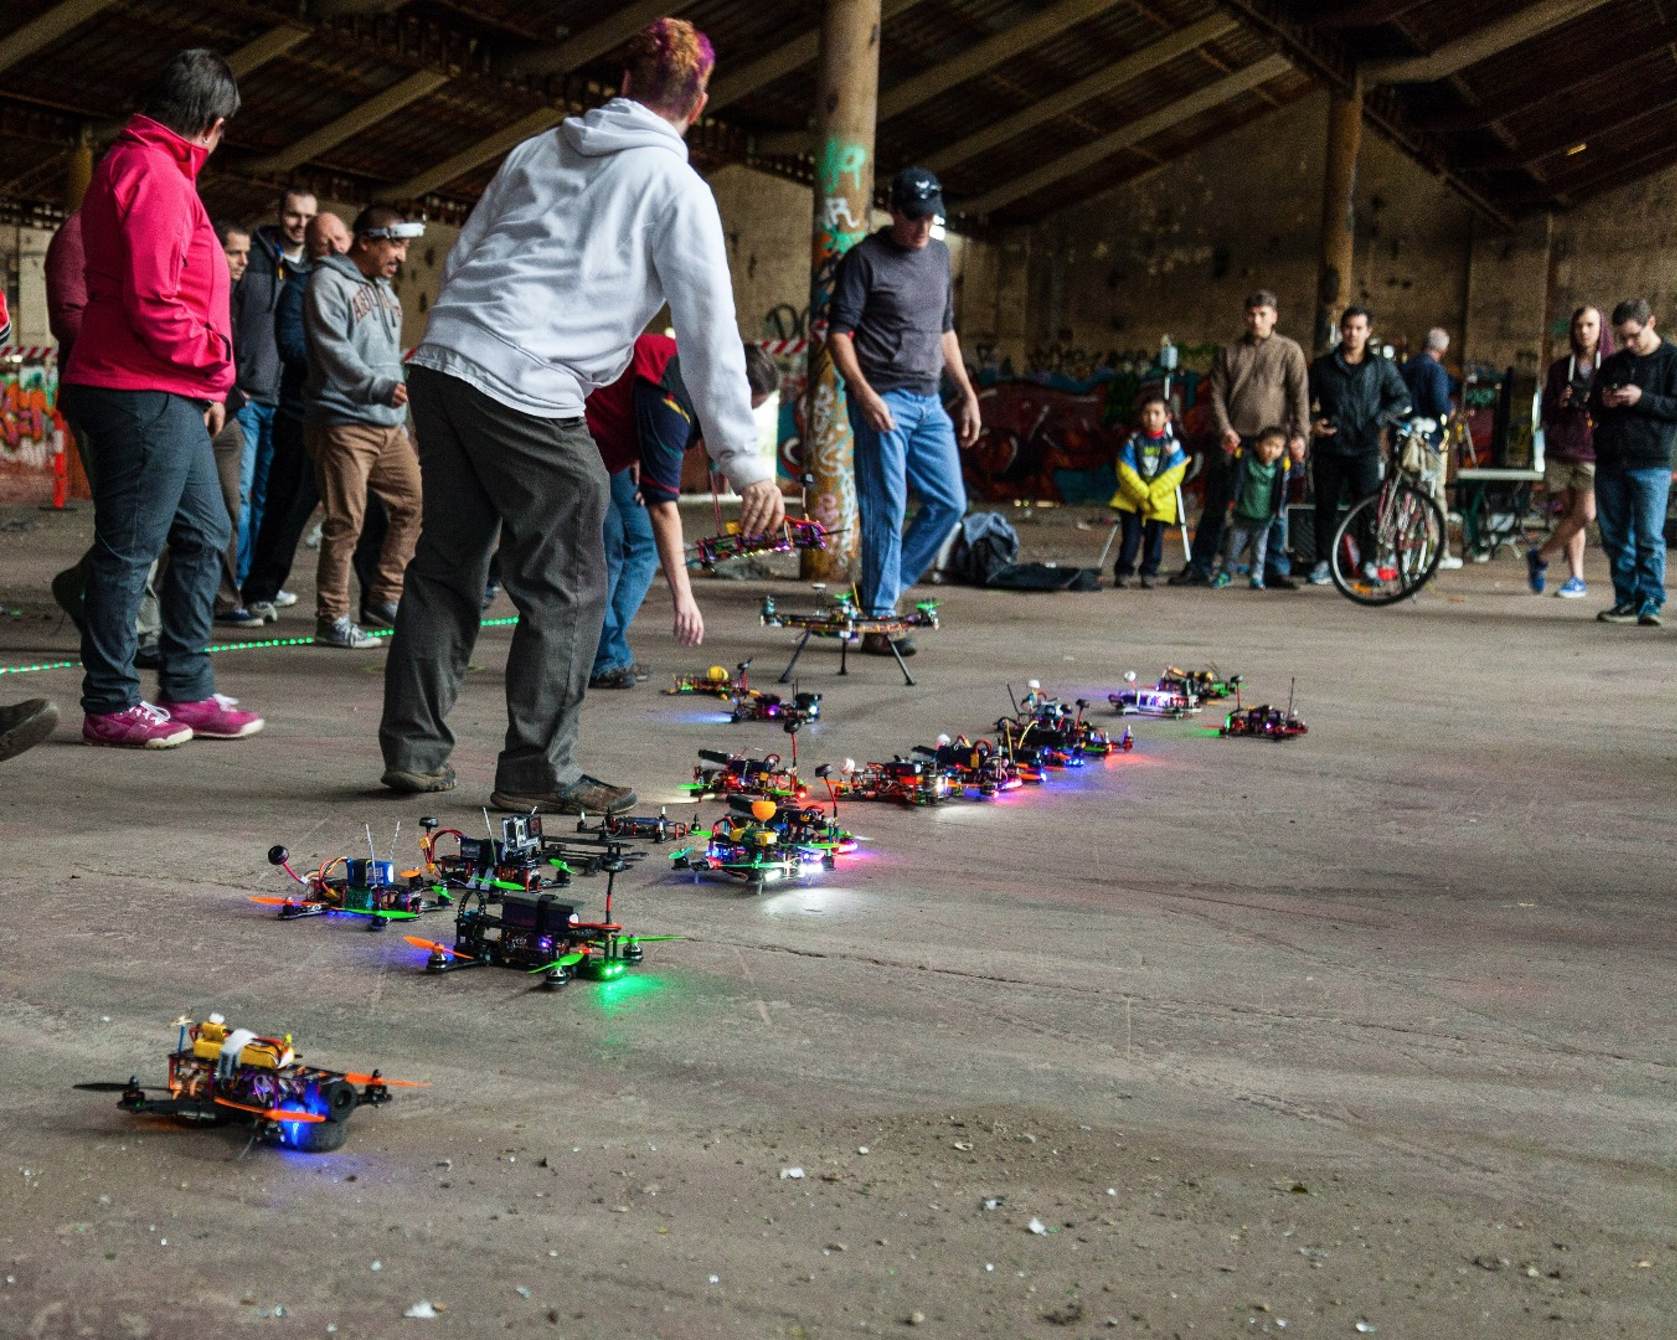 Drone racing started underground, in abandoned buildings. 